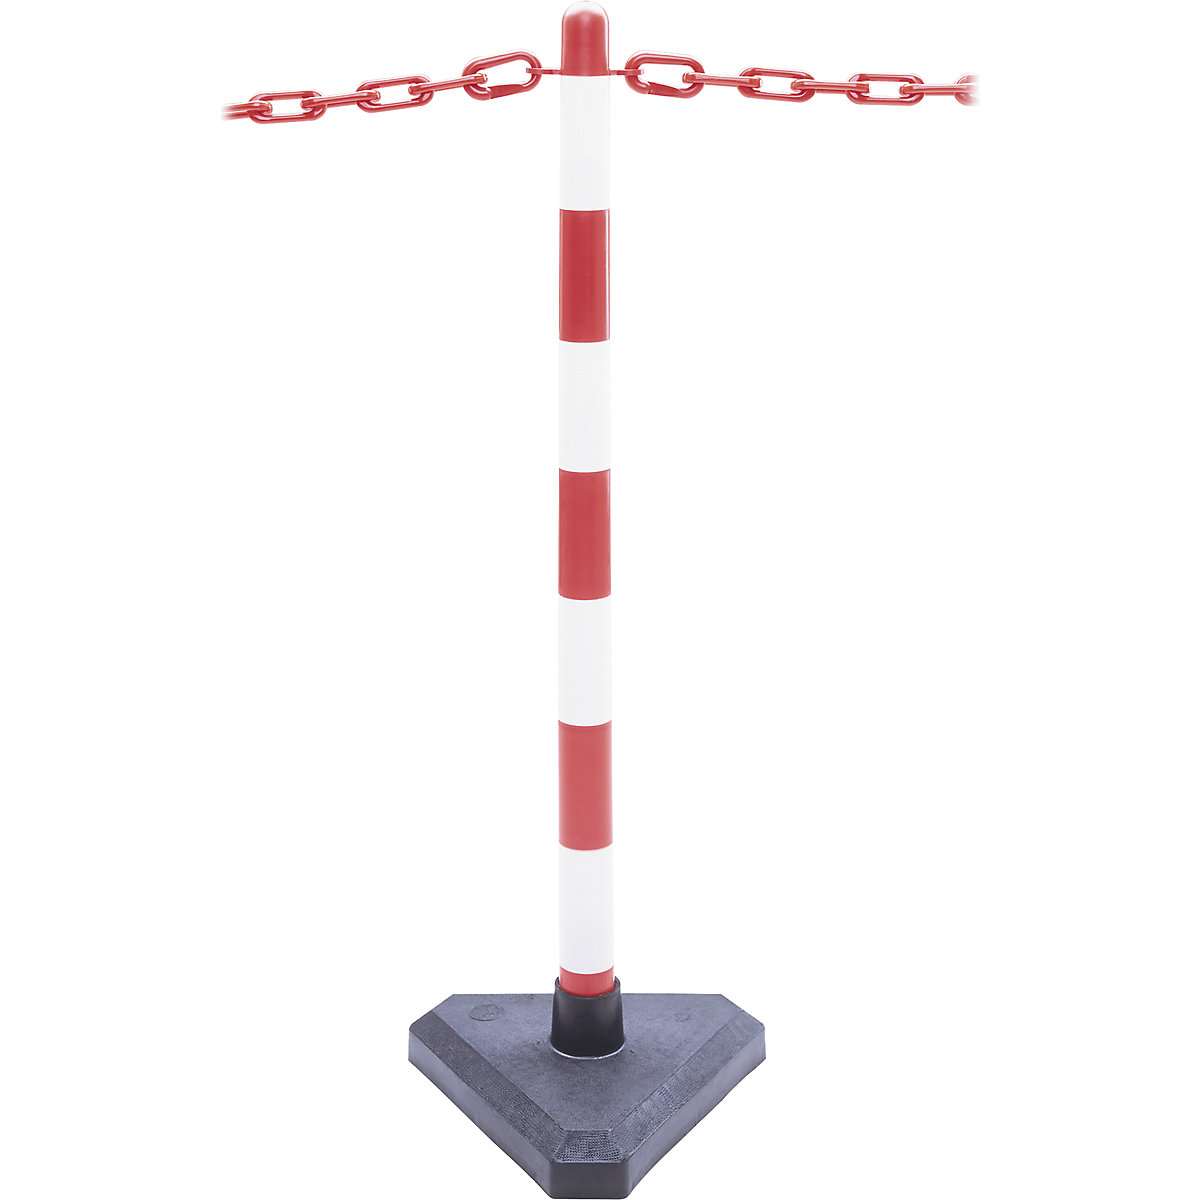 Chain stand set, cement-filled triangular foot, 6 posts, 10 m chain, red / white